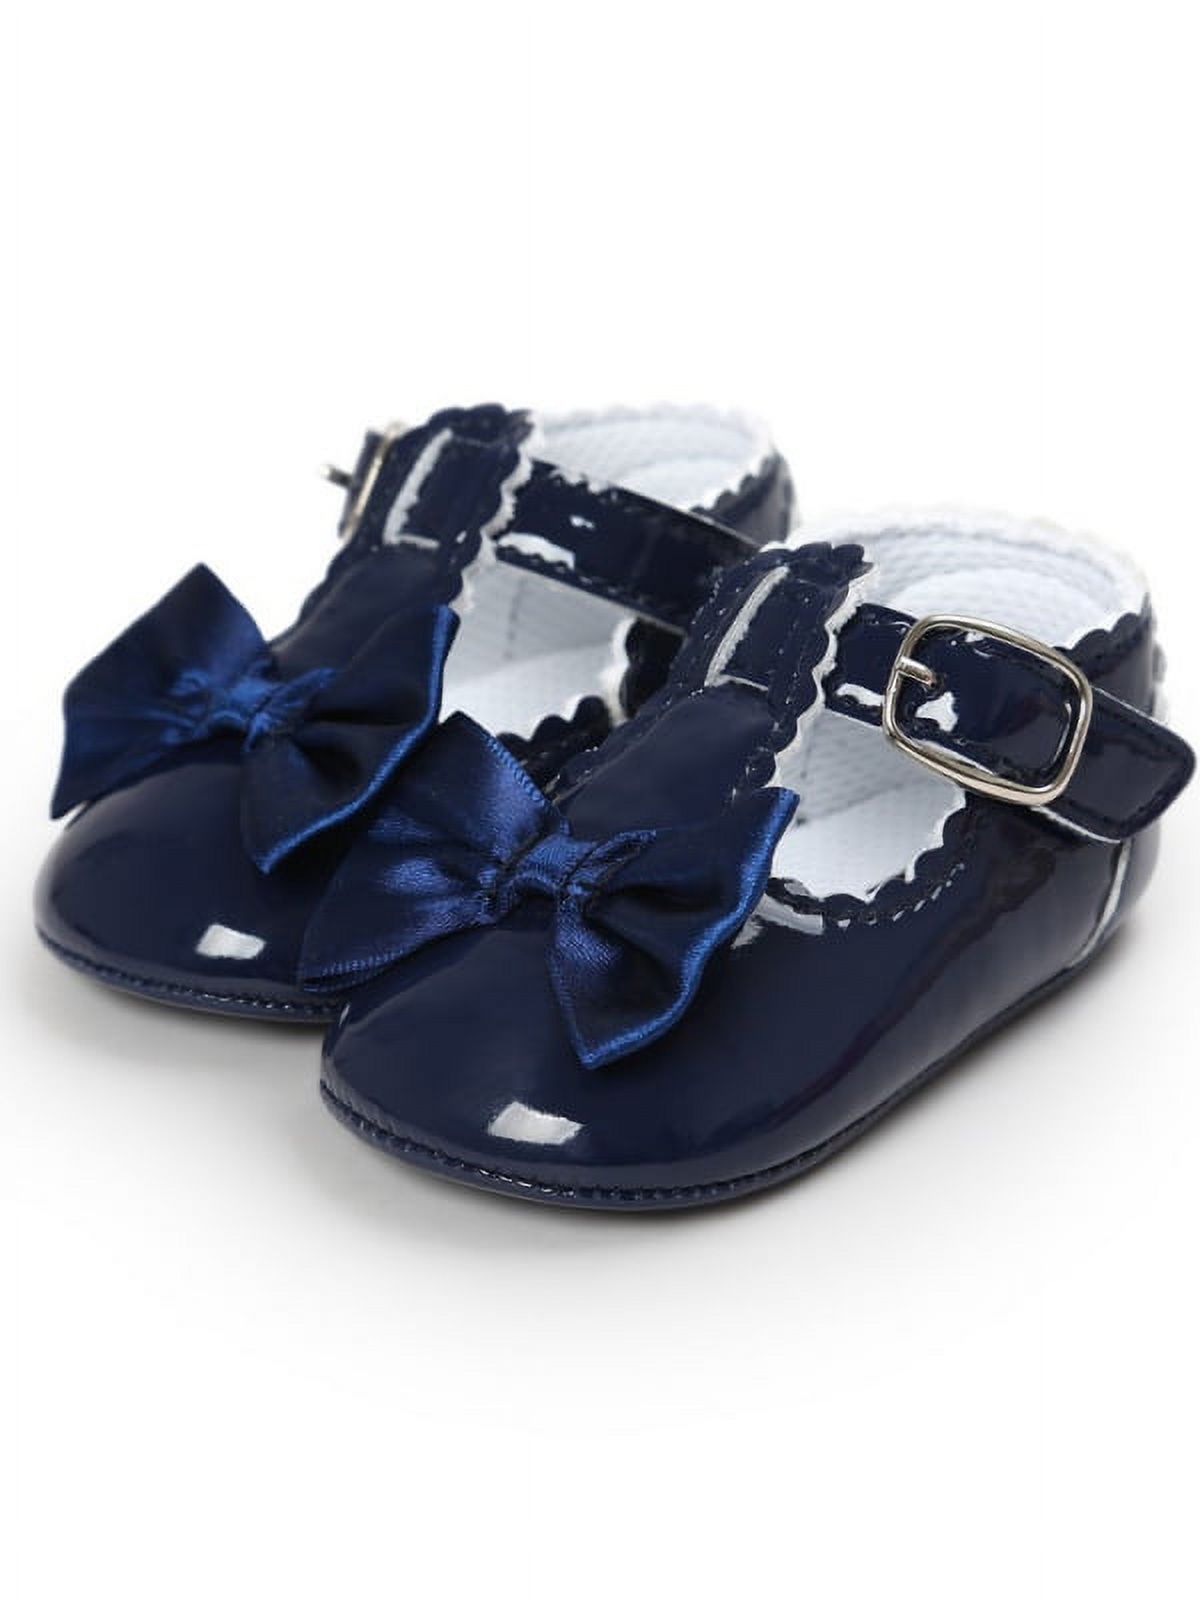 Lavaport Newborn Baby Girls Bowknot Shoes PU Leather Buckle First Walkers - image 2 of 5